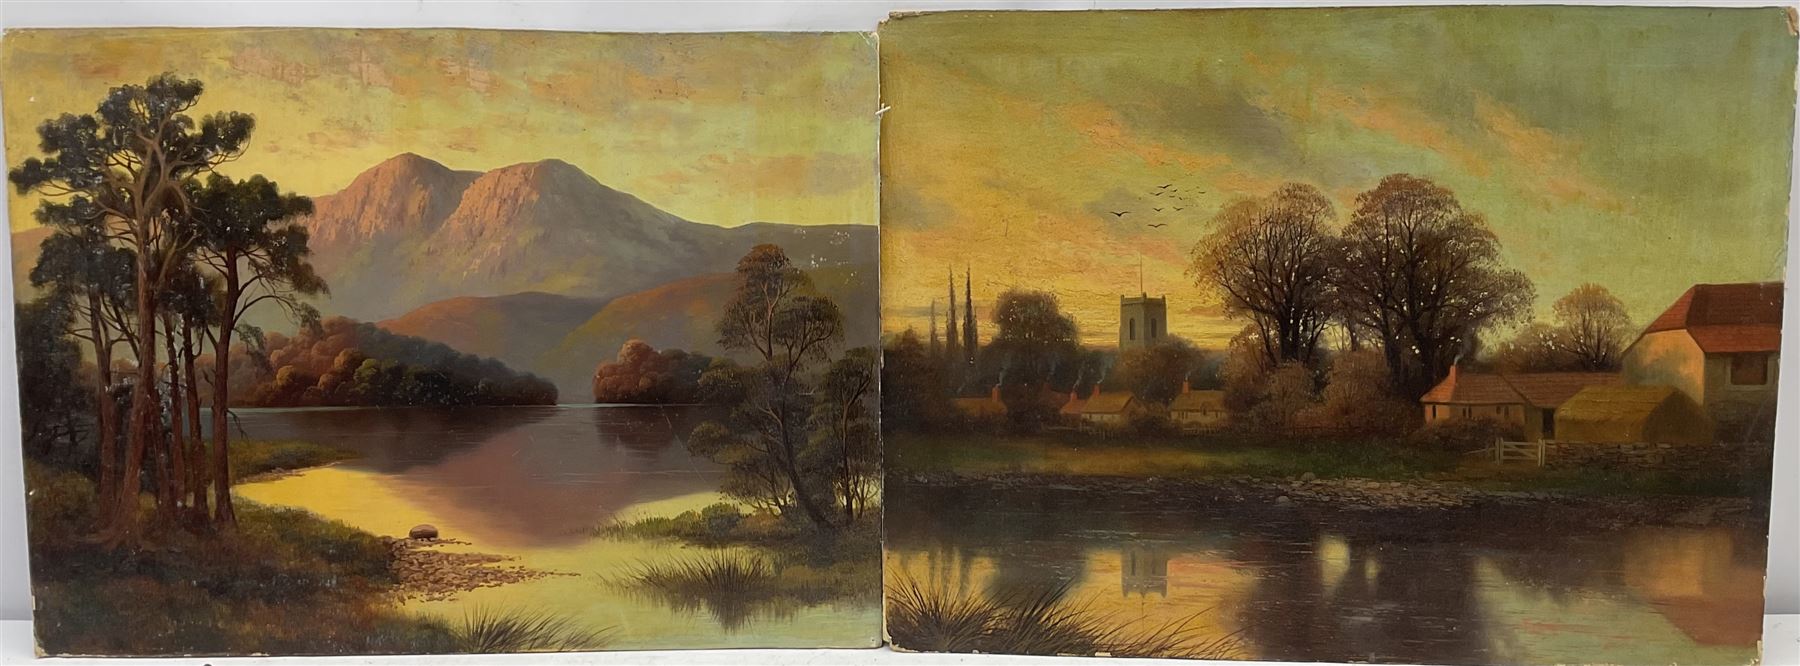 English School (19th century): Lakeland and River scenes at Sunset